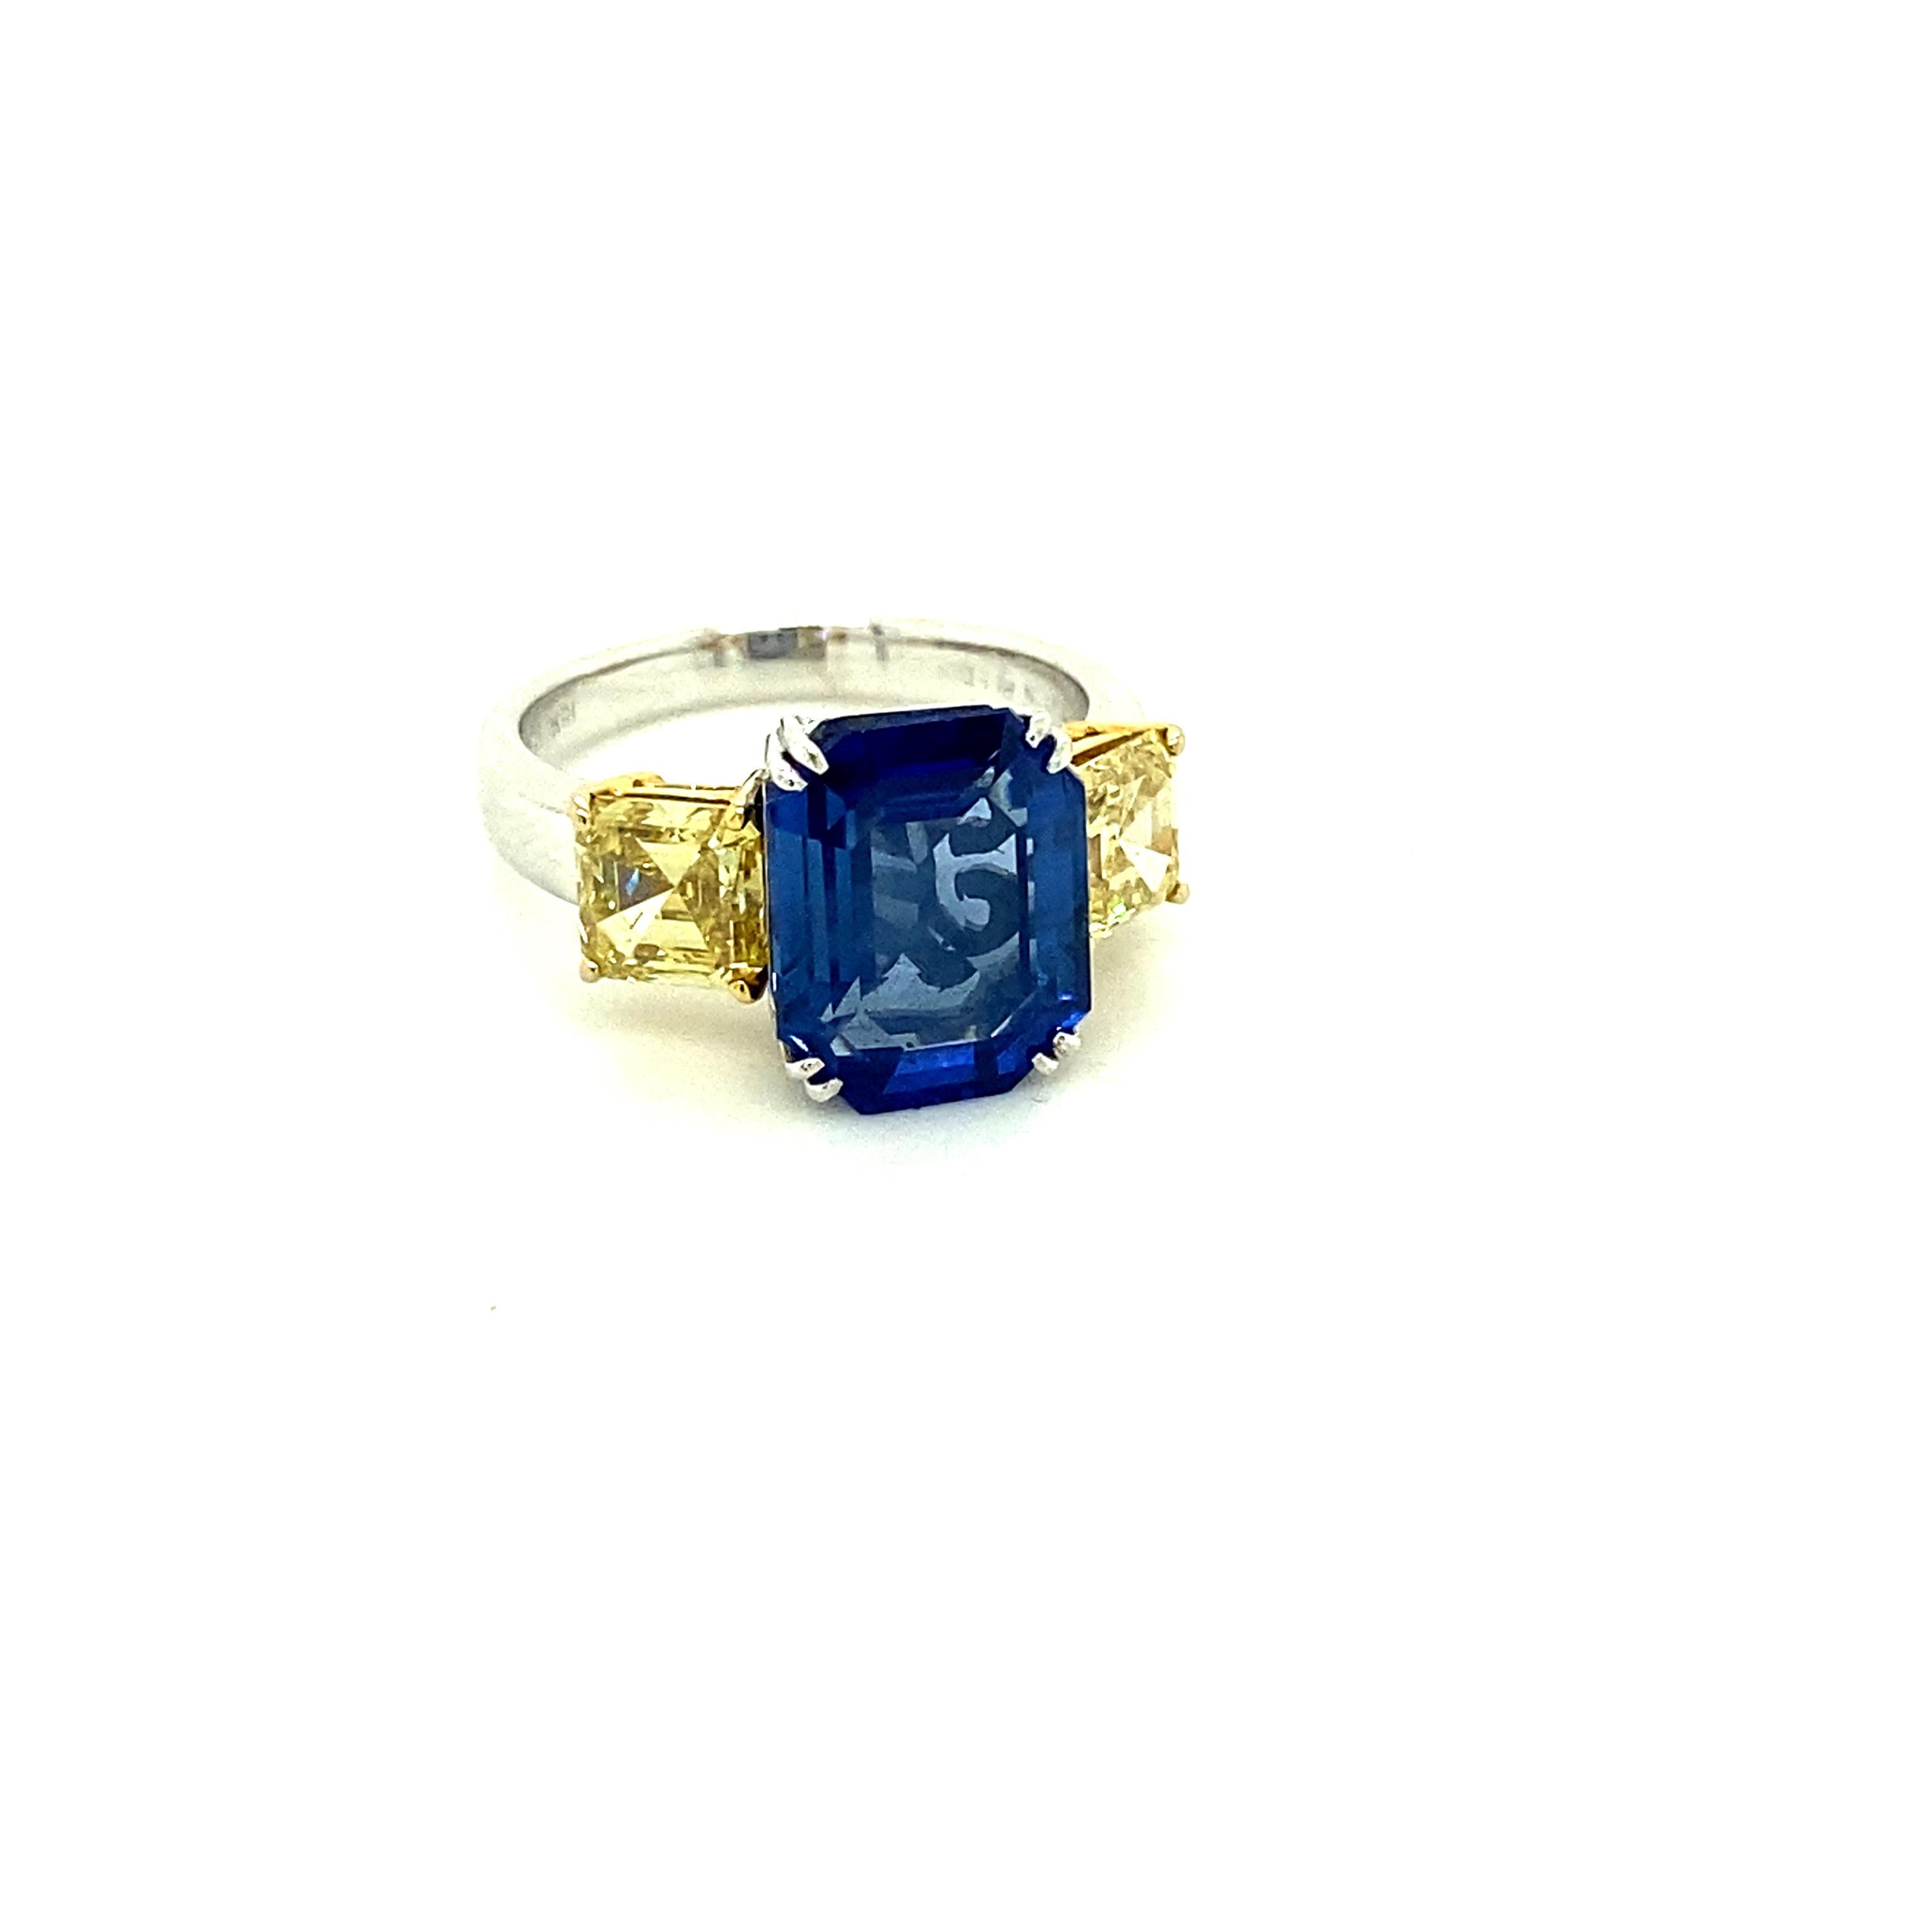 5.77 Carat GIA Certified Blue Sapphire and Fancy Yellow Diamonds Gold Ring:

A beautiful ring, it features a GIA certified octagon-cut shaped blue sapphire weighing 5.77 carat with GIA certified fancy yellow diamond and fancy deep yellow diamond on